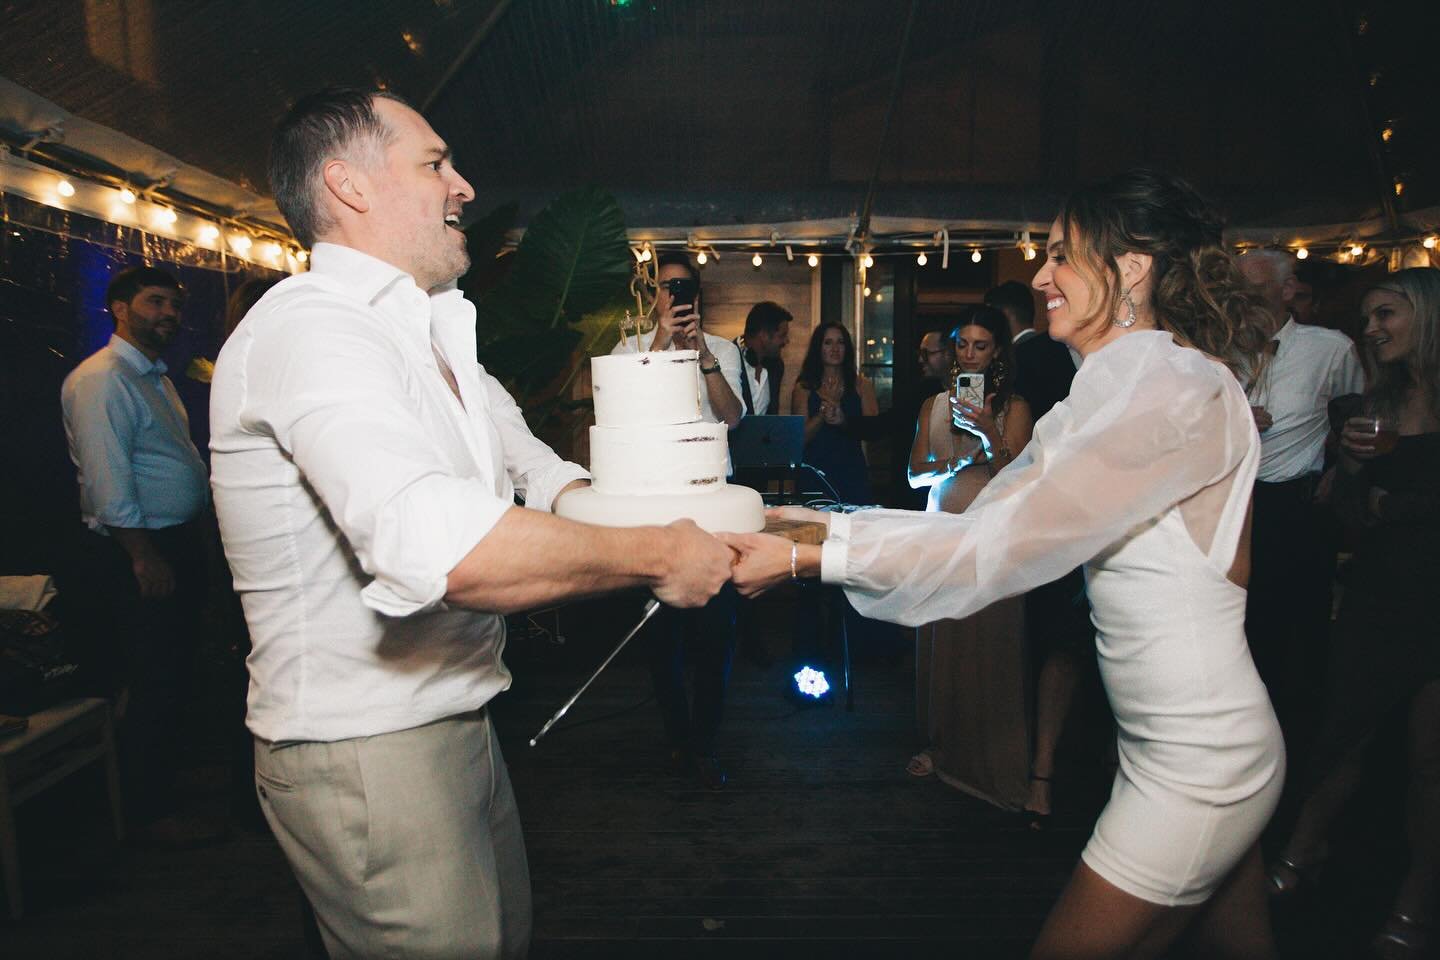 One of my favorite weddings ever! A beach wedding in the Hamptons that was rained out, but they improvised nicely moving everything to their (stunning) home backyard and threw the most epic receptions ever ✨ An incredibly FUN couple cutting cake here